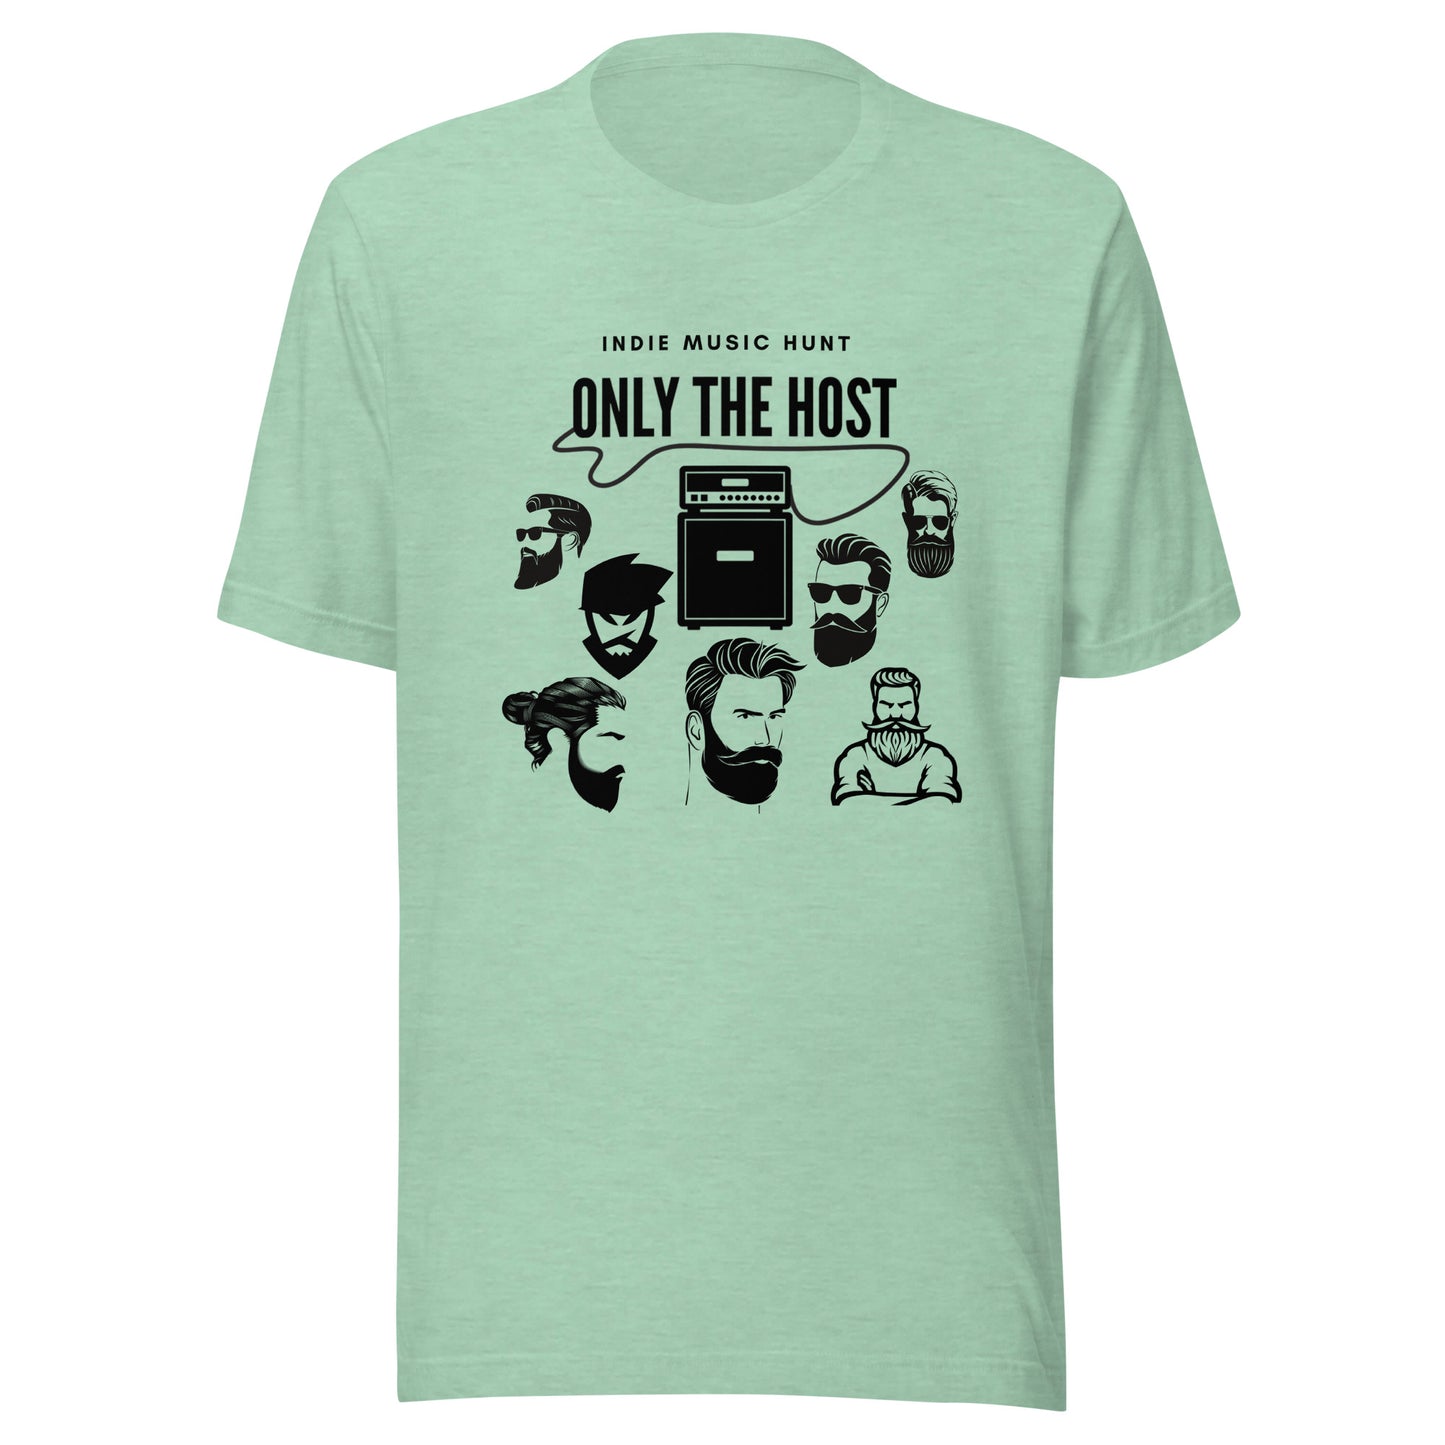 Only The Host Indie Music Hunt T-Shirt